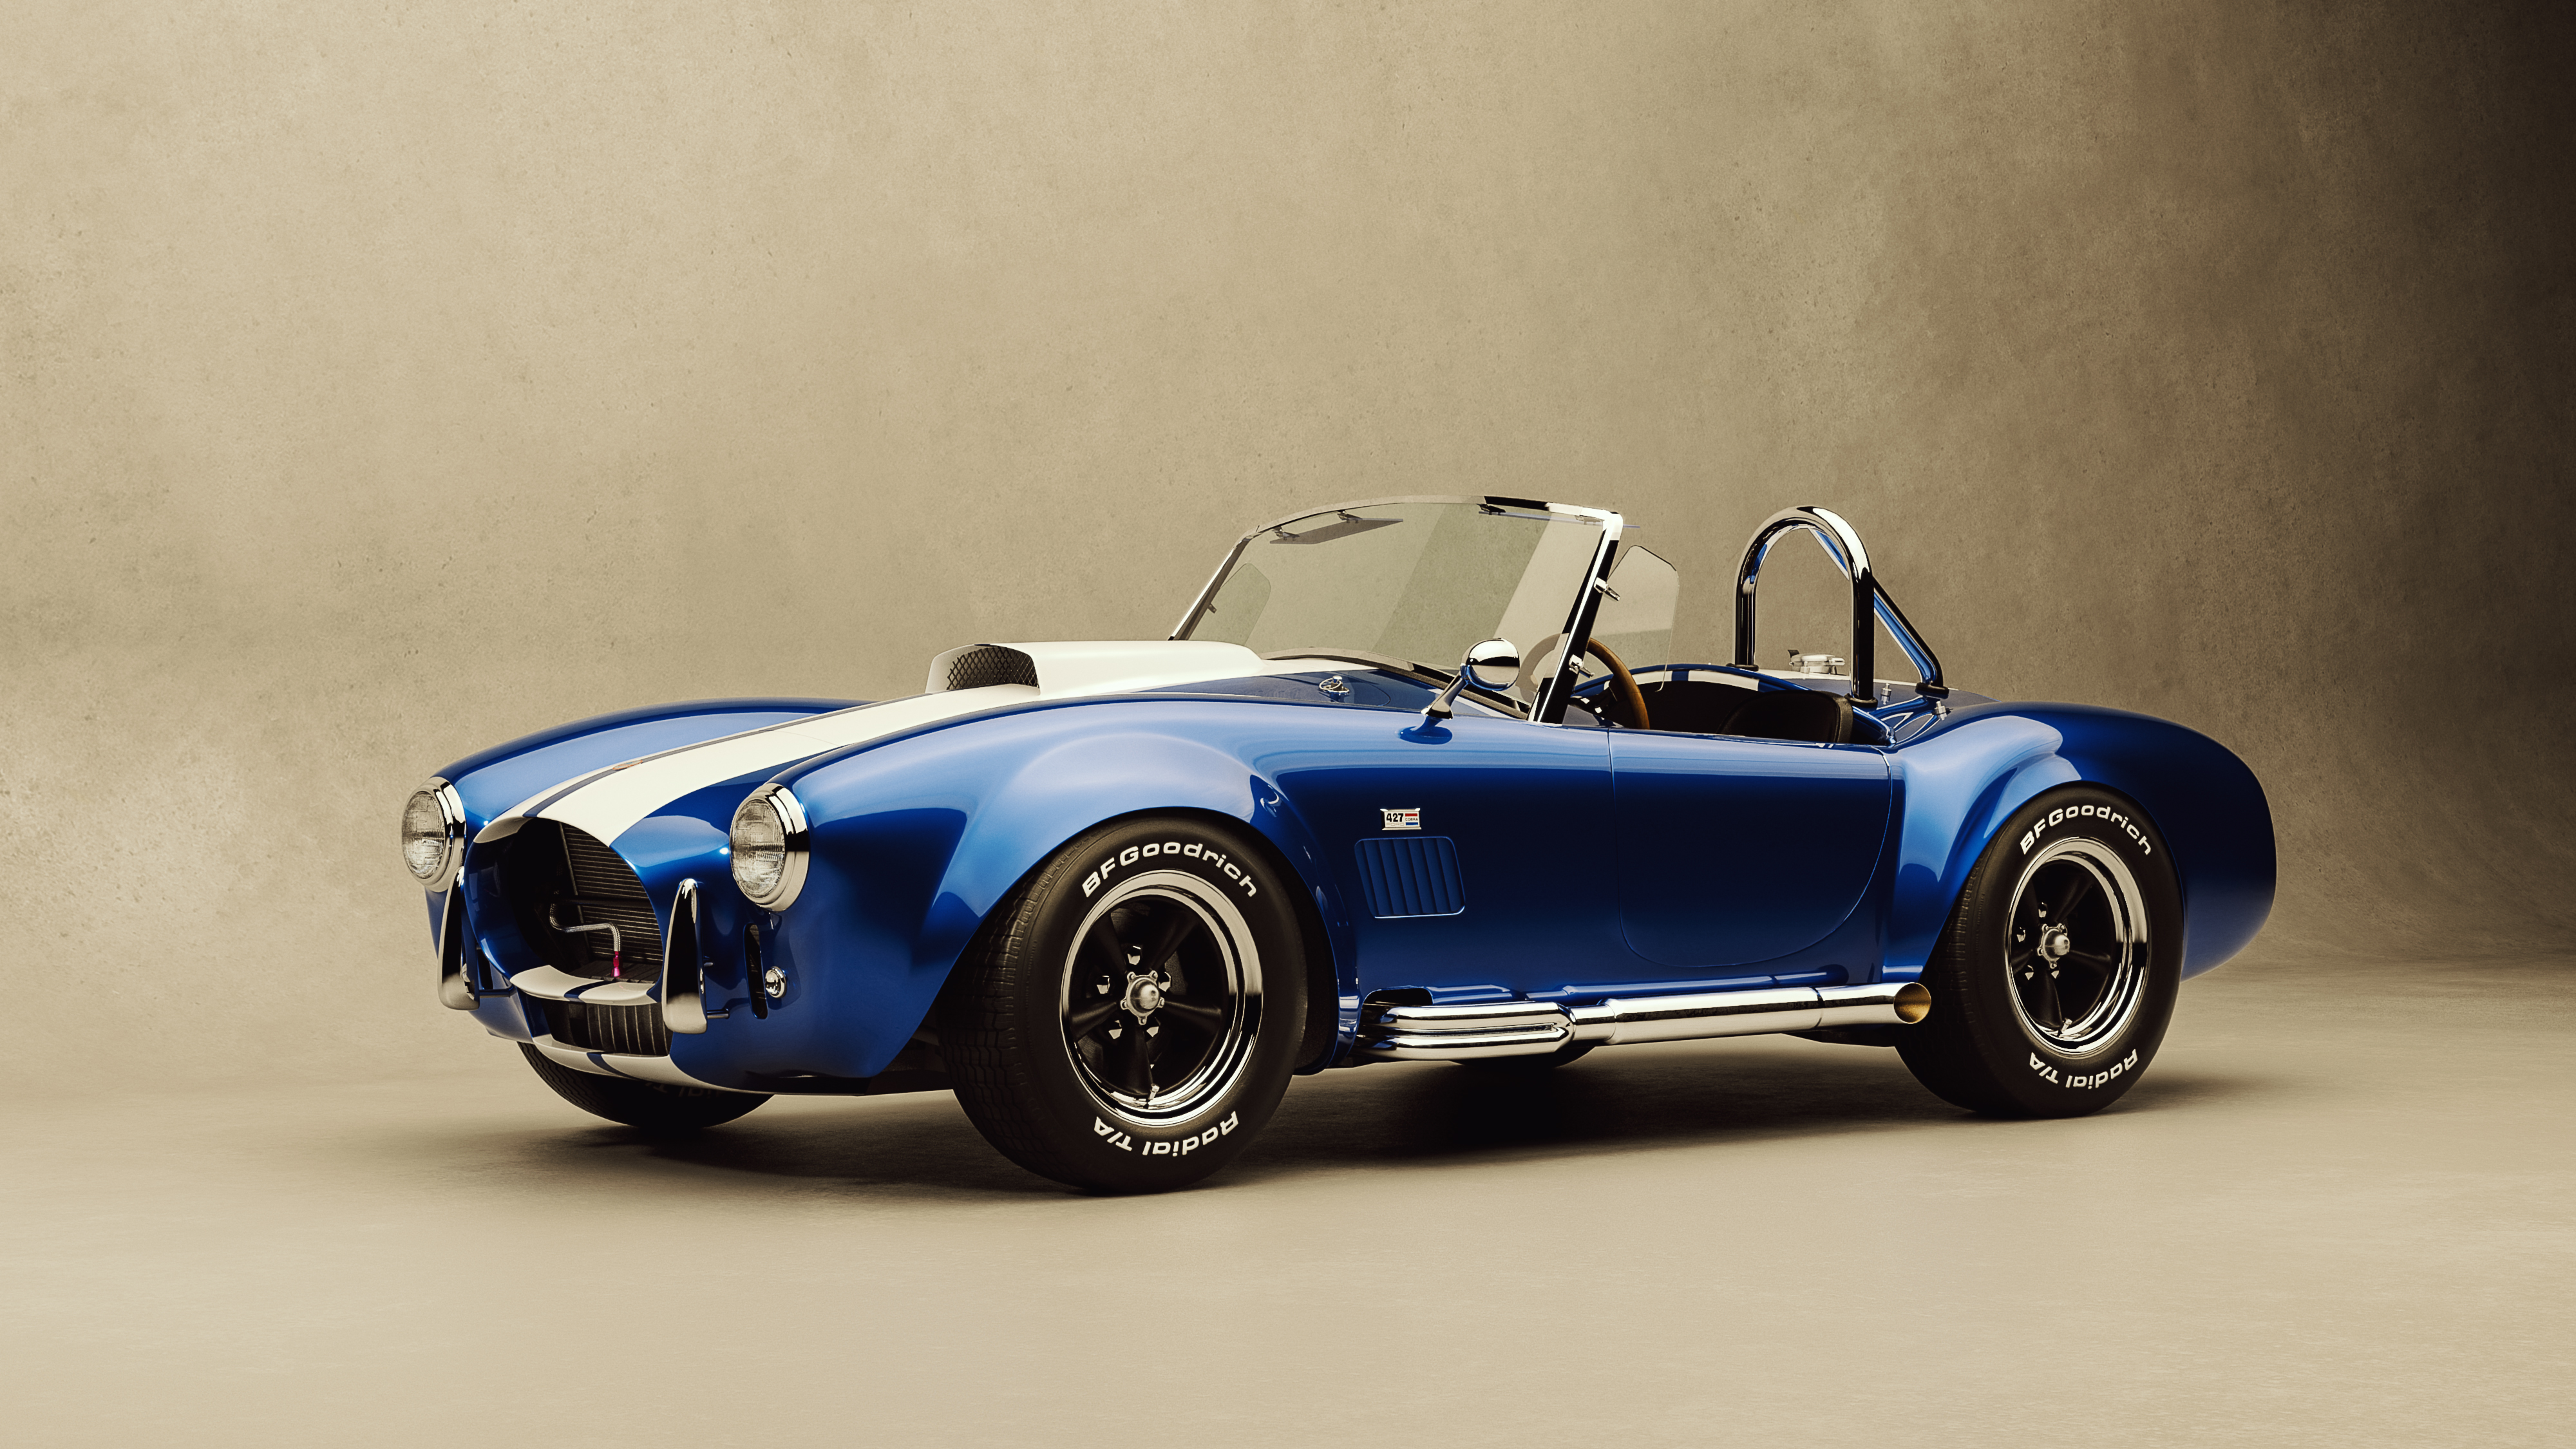 HQ Shelby Cobra Wallpapers | File 4445.83Kb